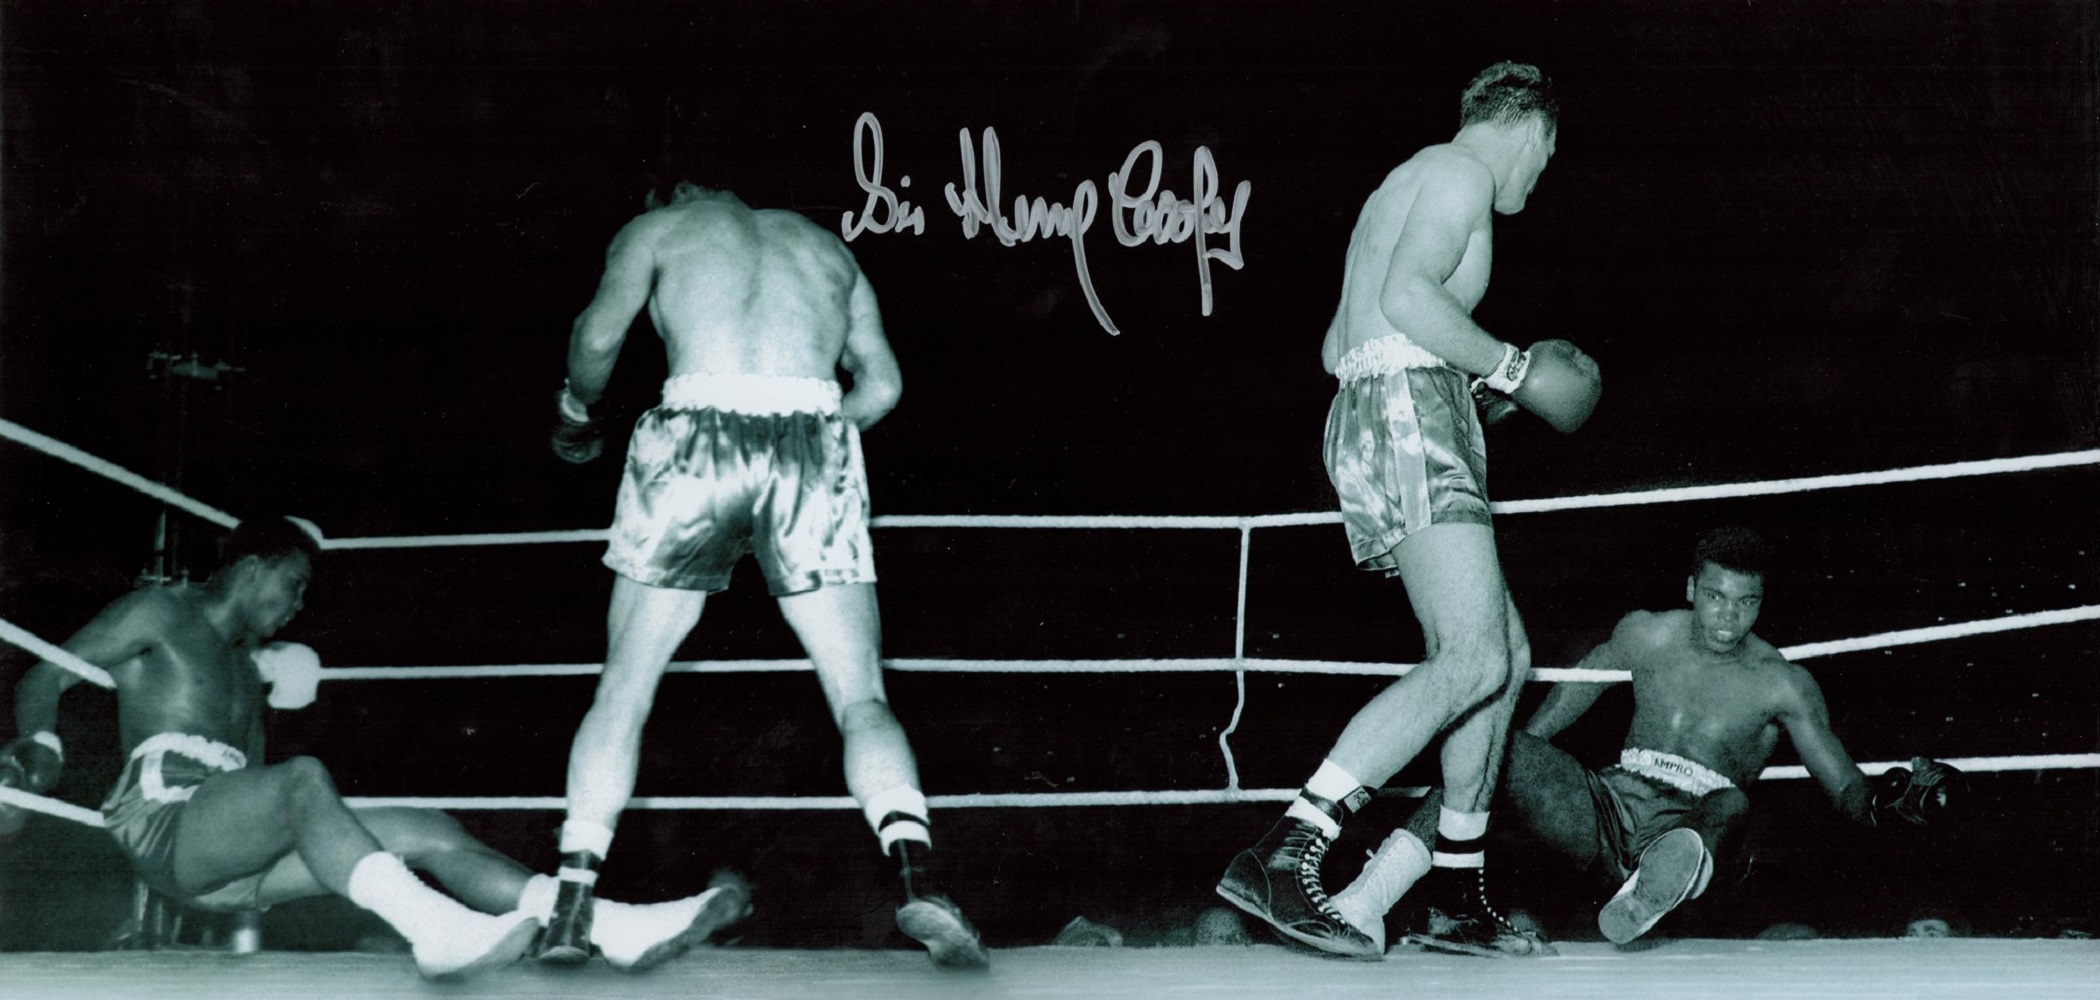 Sir Henry Cooper Signed 18 x 8 Black and White Photo. Photo shows Cooper in action. Good